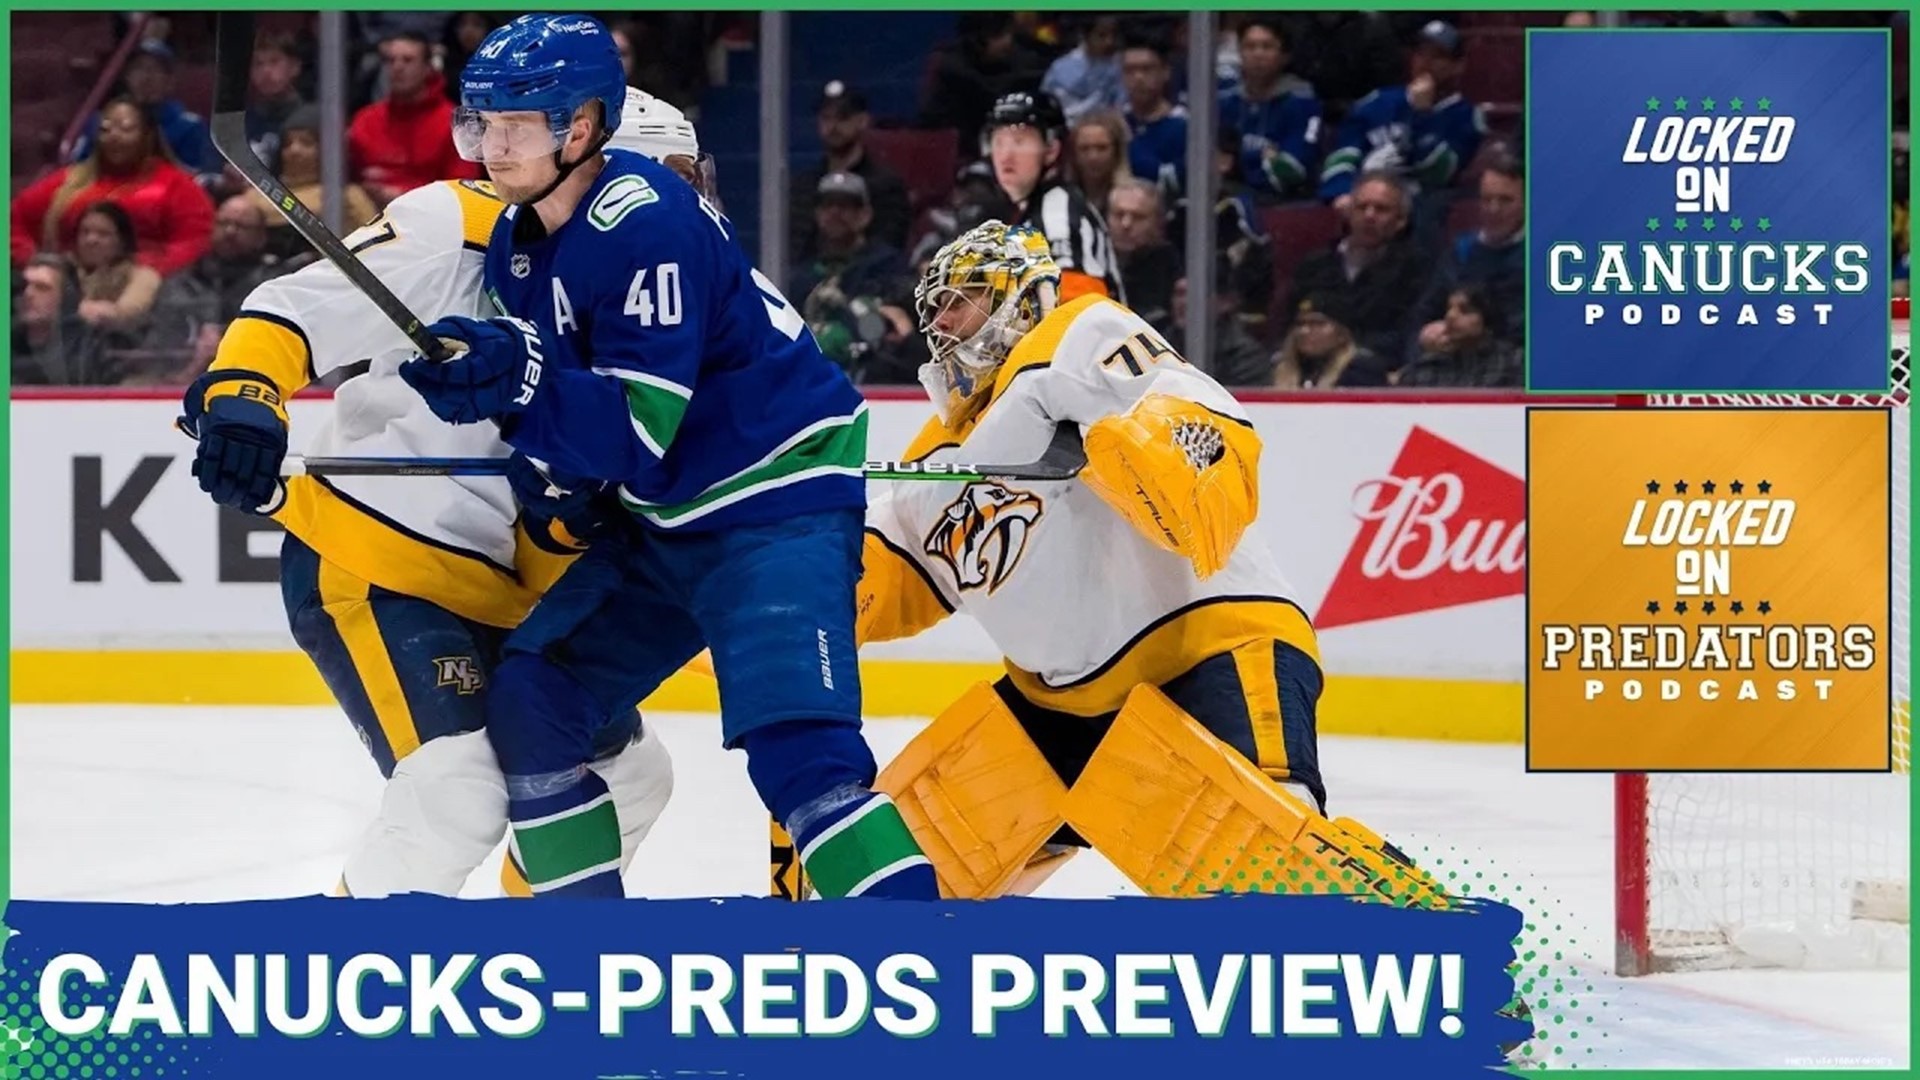 The Vancouver Canucks are about to battle another one of the league's most unlikely playoff teams, the Nashville Predators.